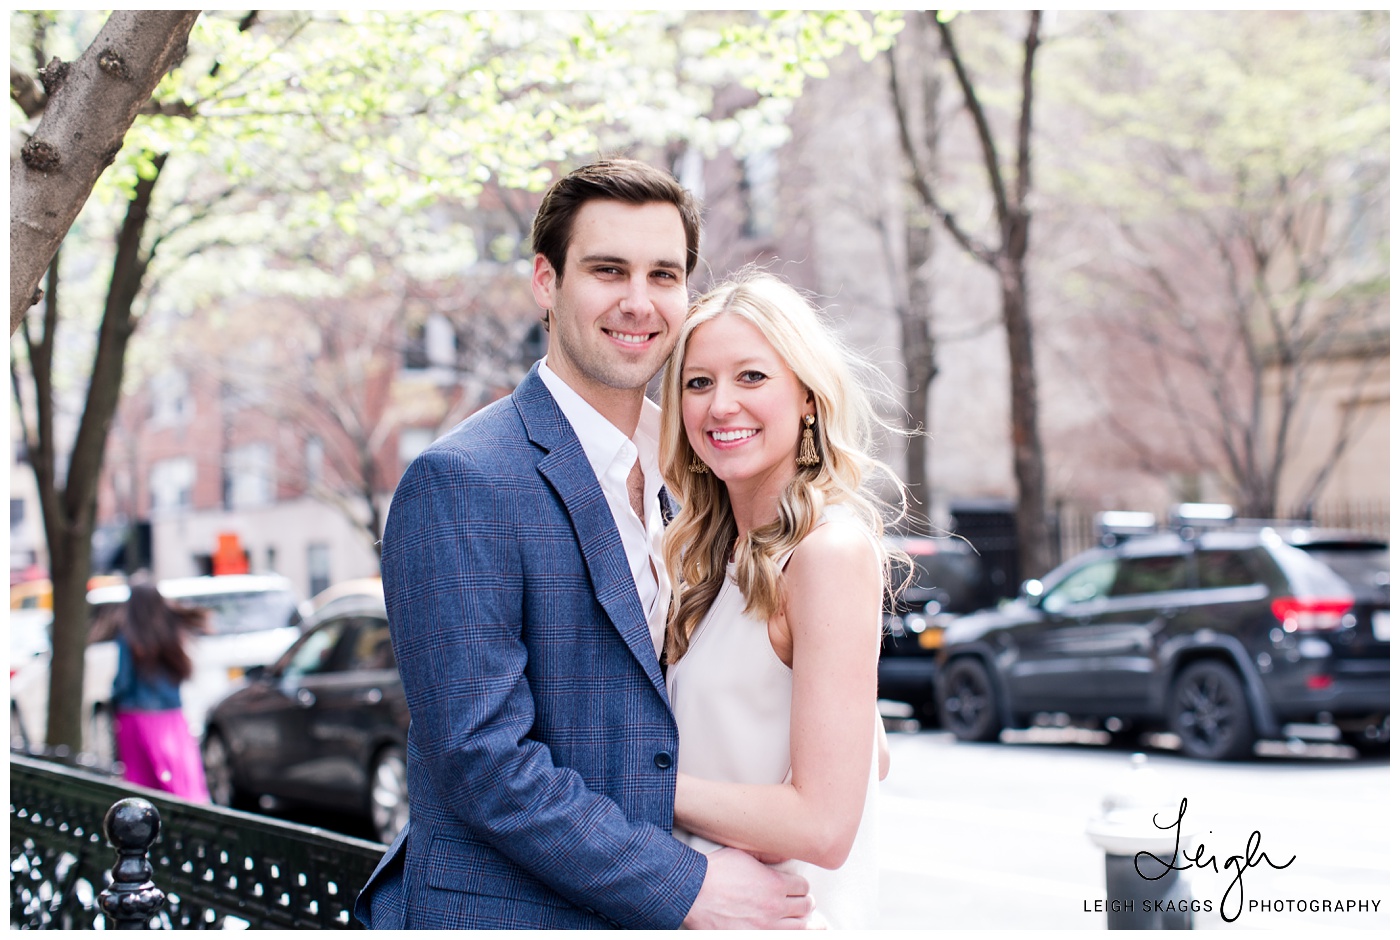 Gramercy Park Engagement session in New York City!